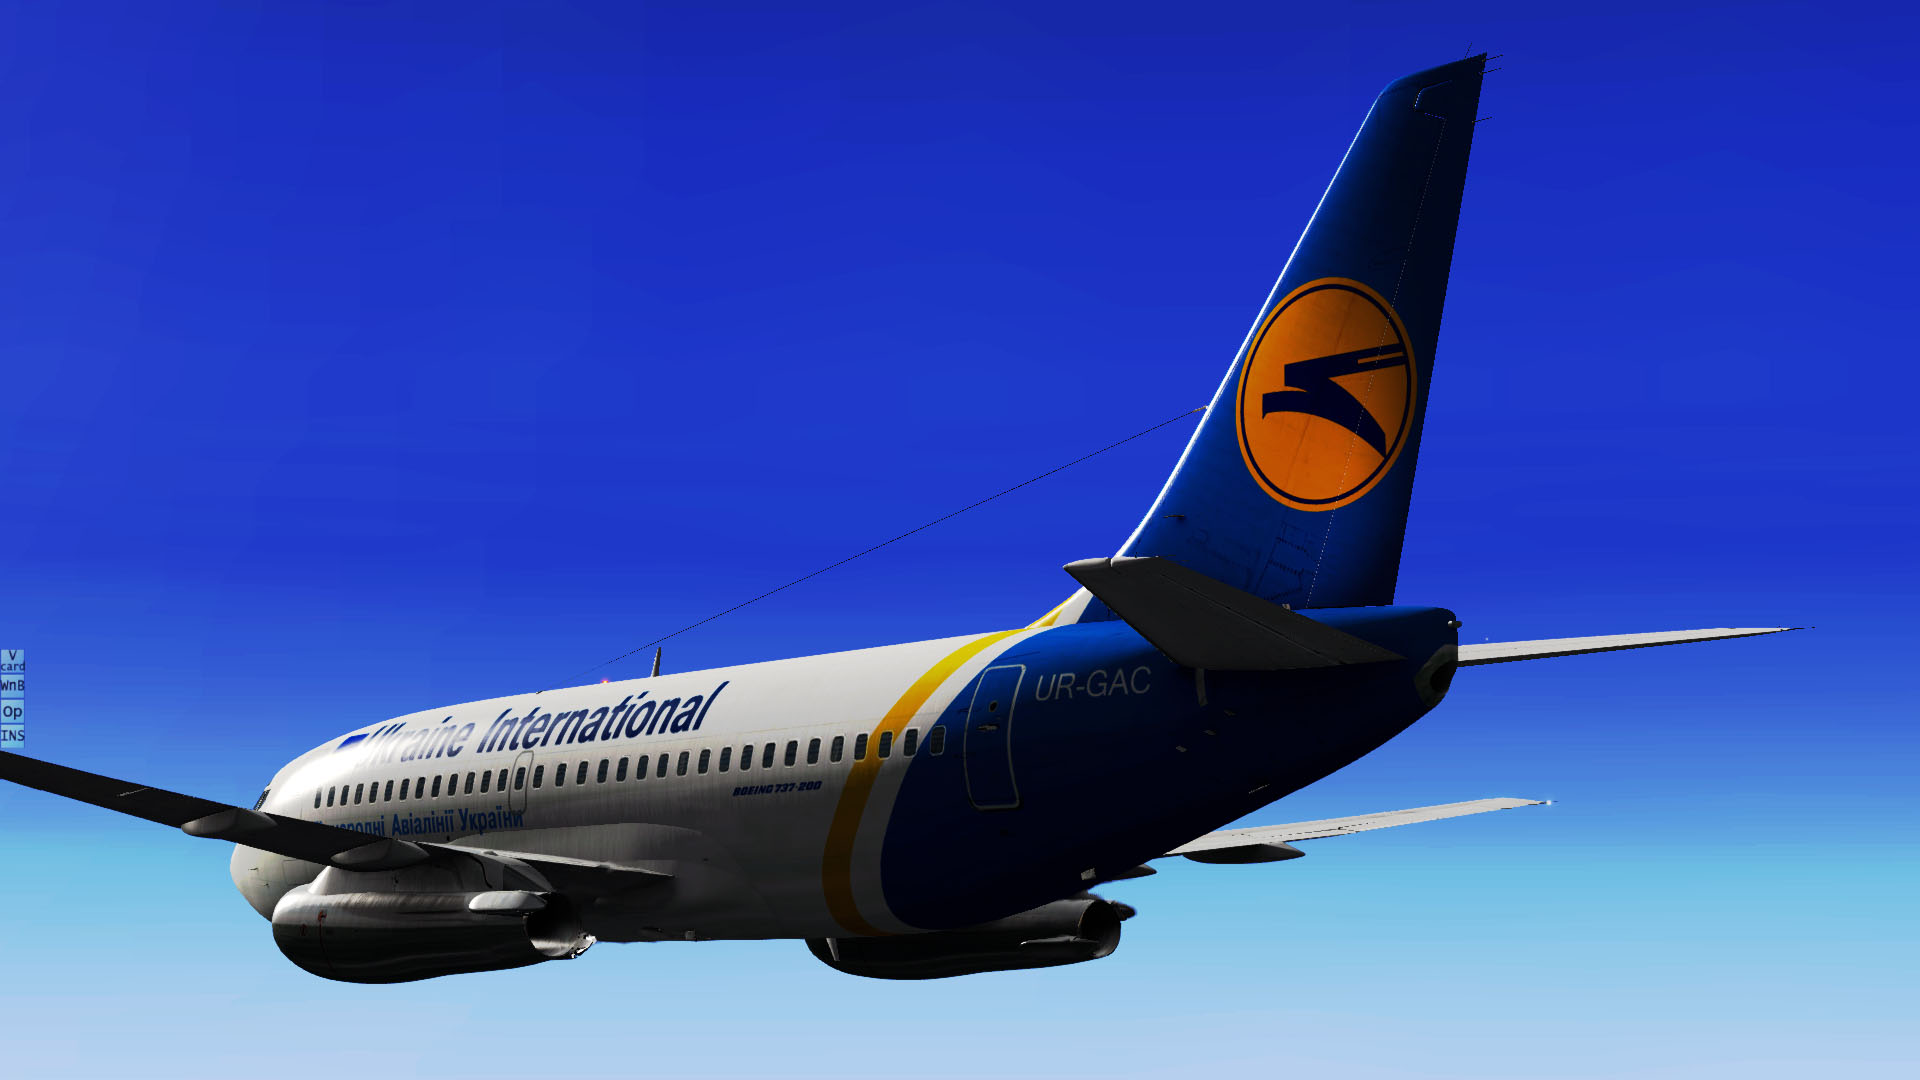 More information about "Ukraine International Airlines - Boeing 737-200 TwinJet"